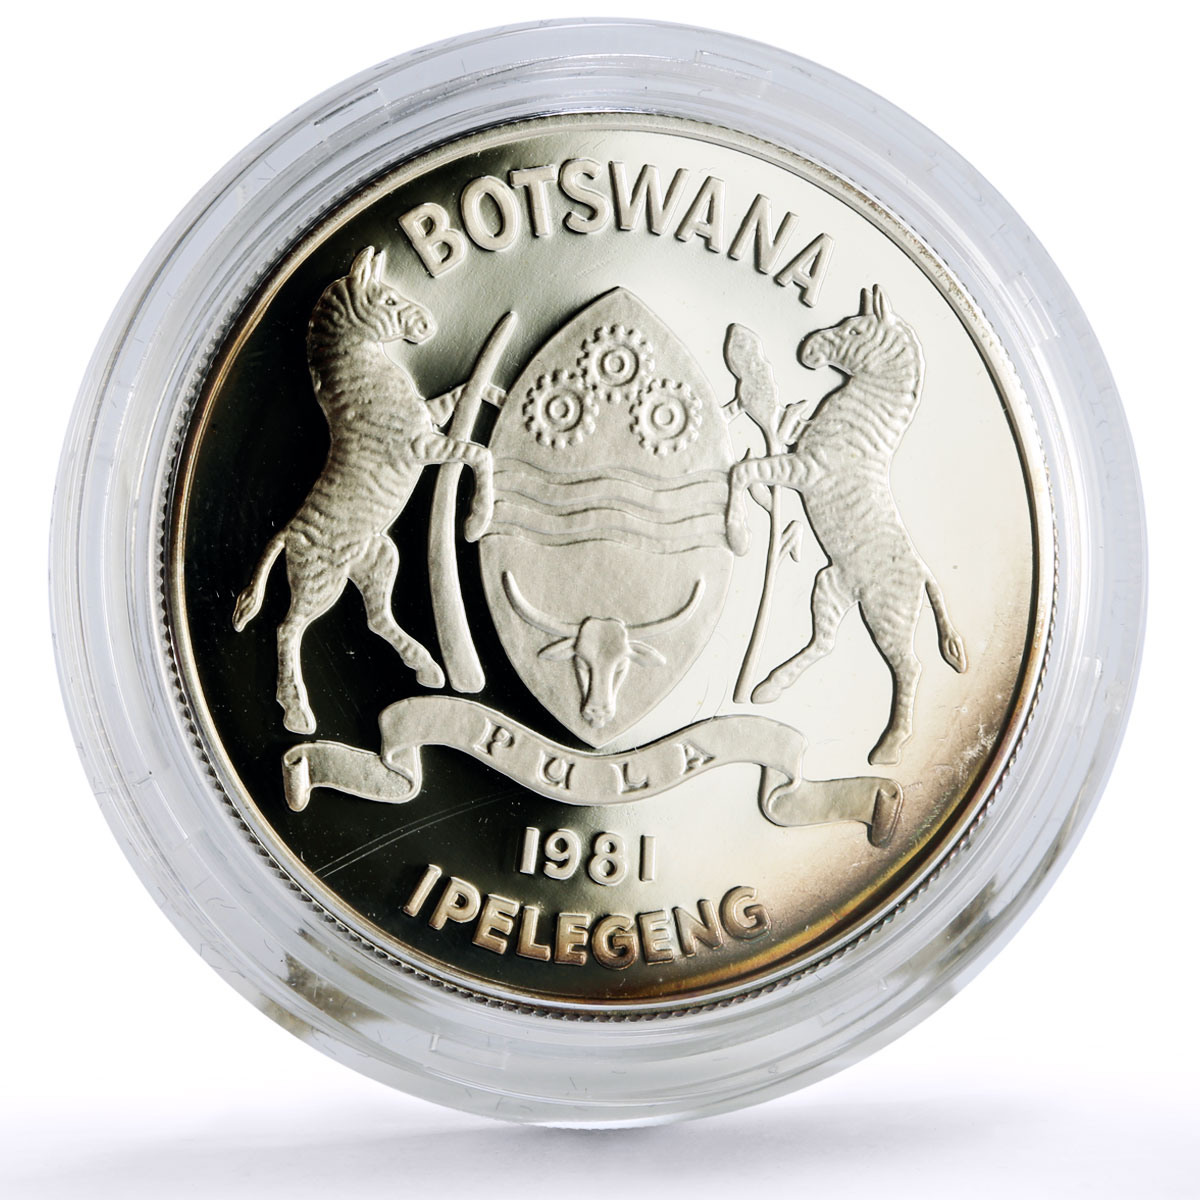 Botswana 5 pula International Year of Disabled Persons Piefort silver coin 1981